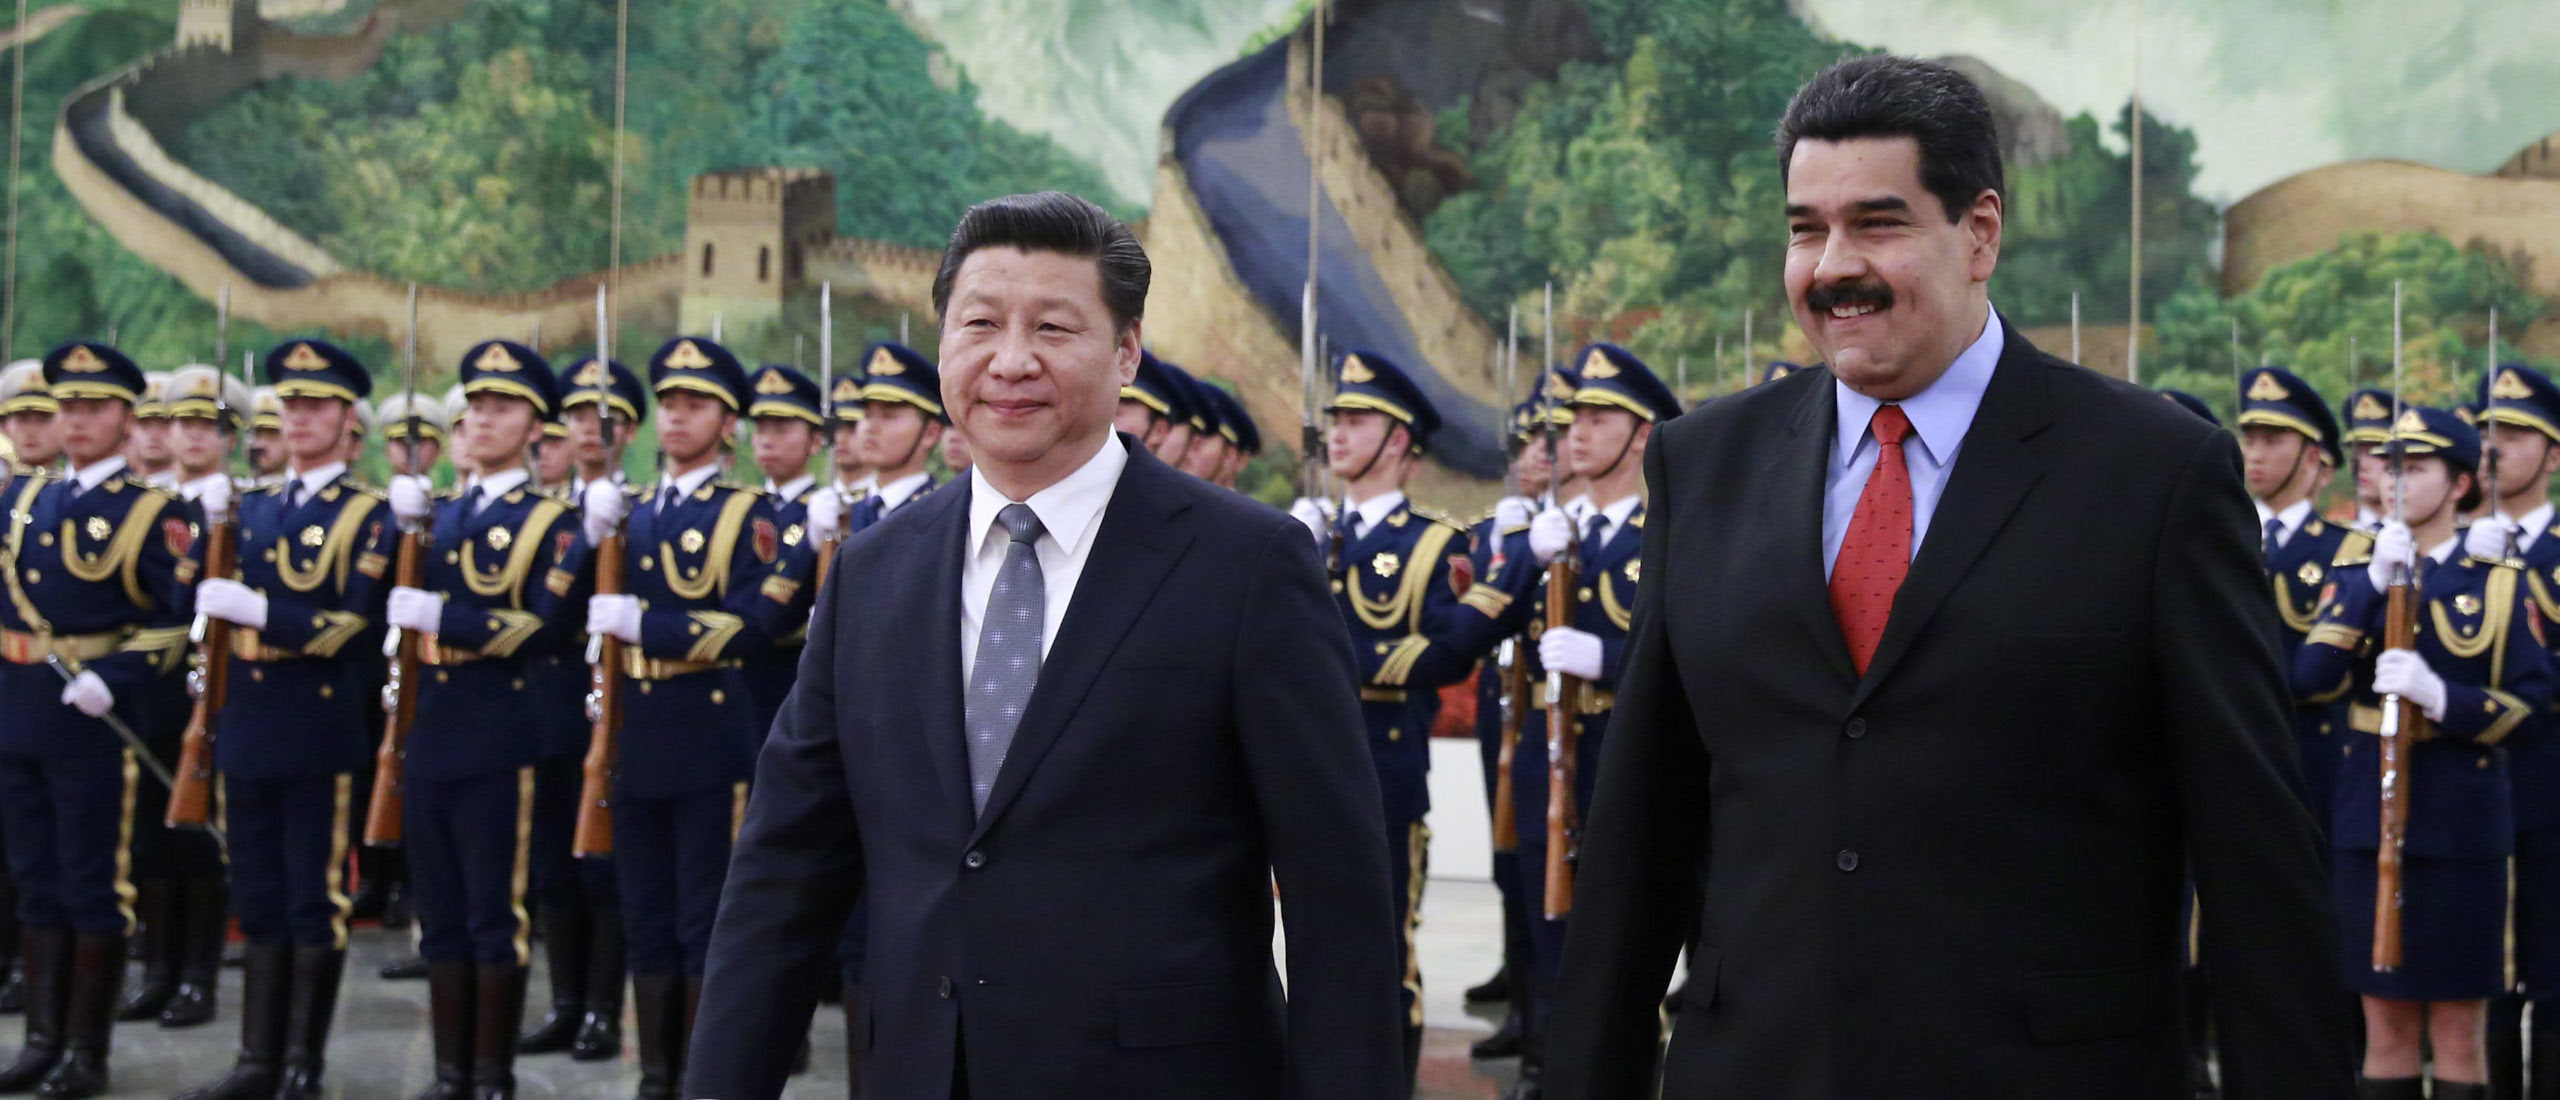 KIRON SKINNER And MATEO HAYDAR: China Is Tightening Its Grip In America’s Backyard